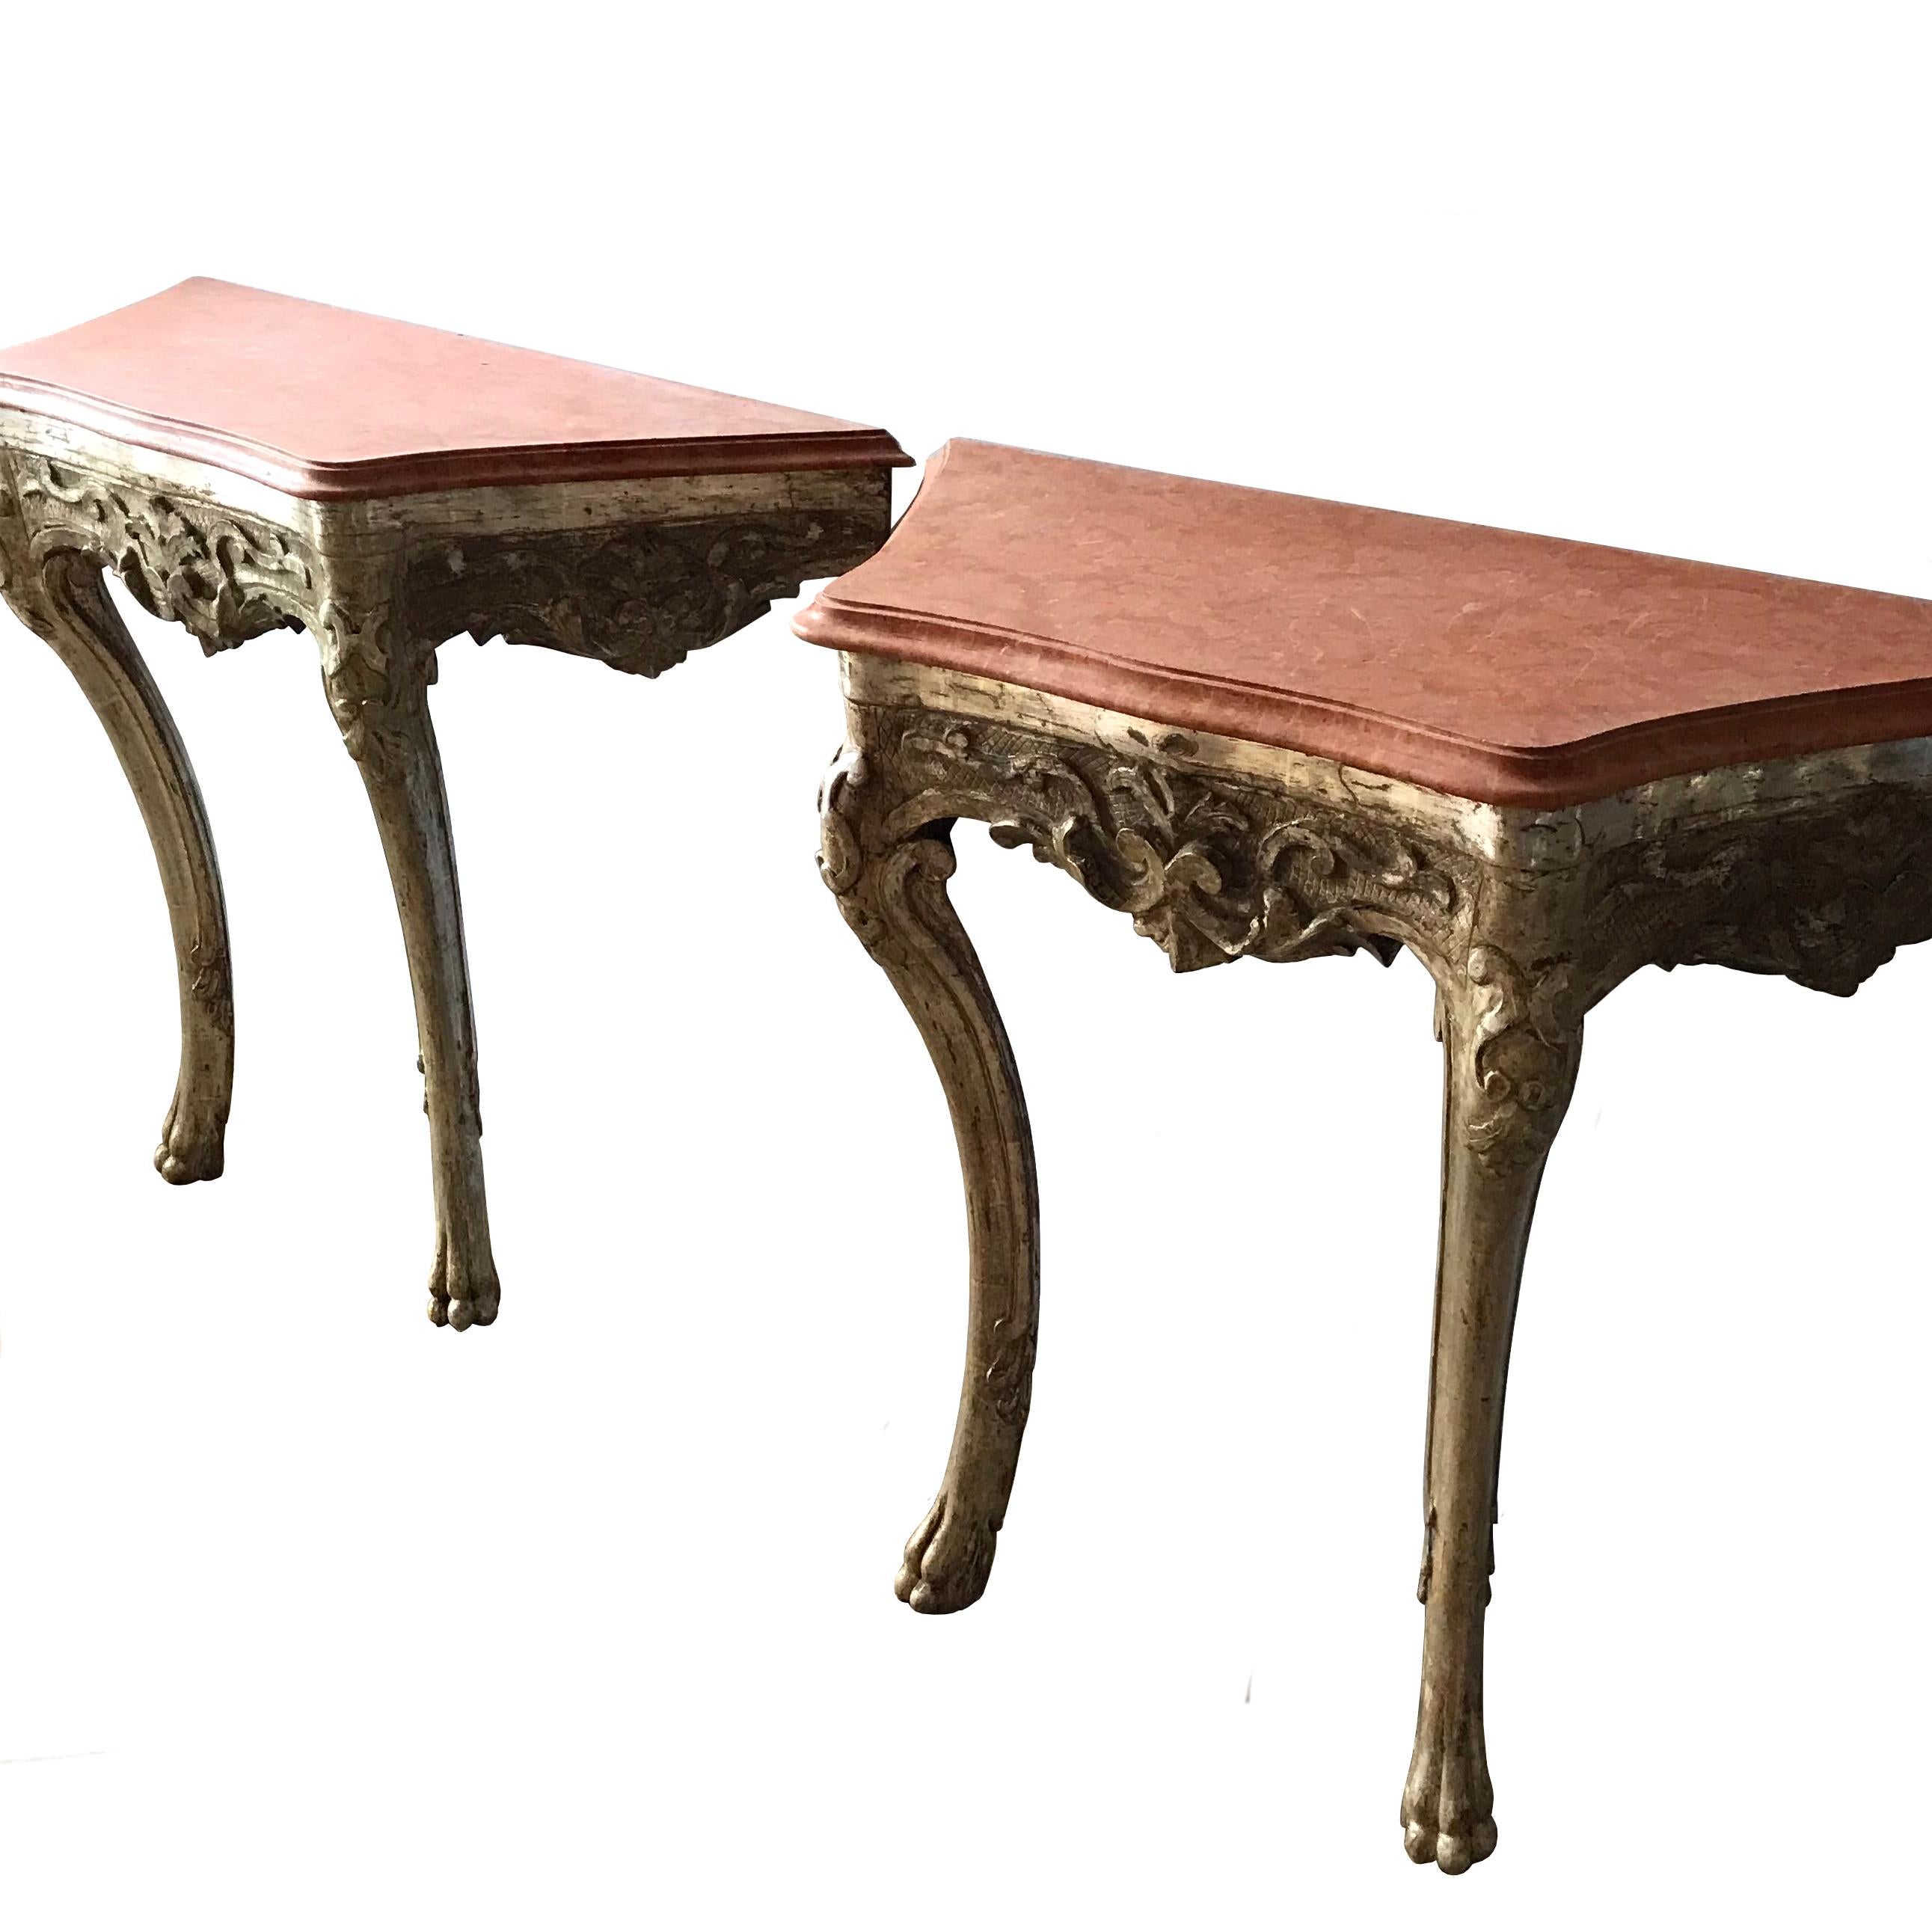 Rococo Pair of Italian C18th Silvered Console Tables with Marble Tops